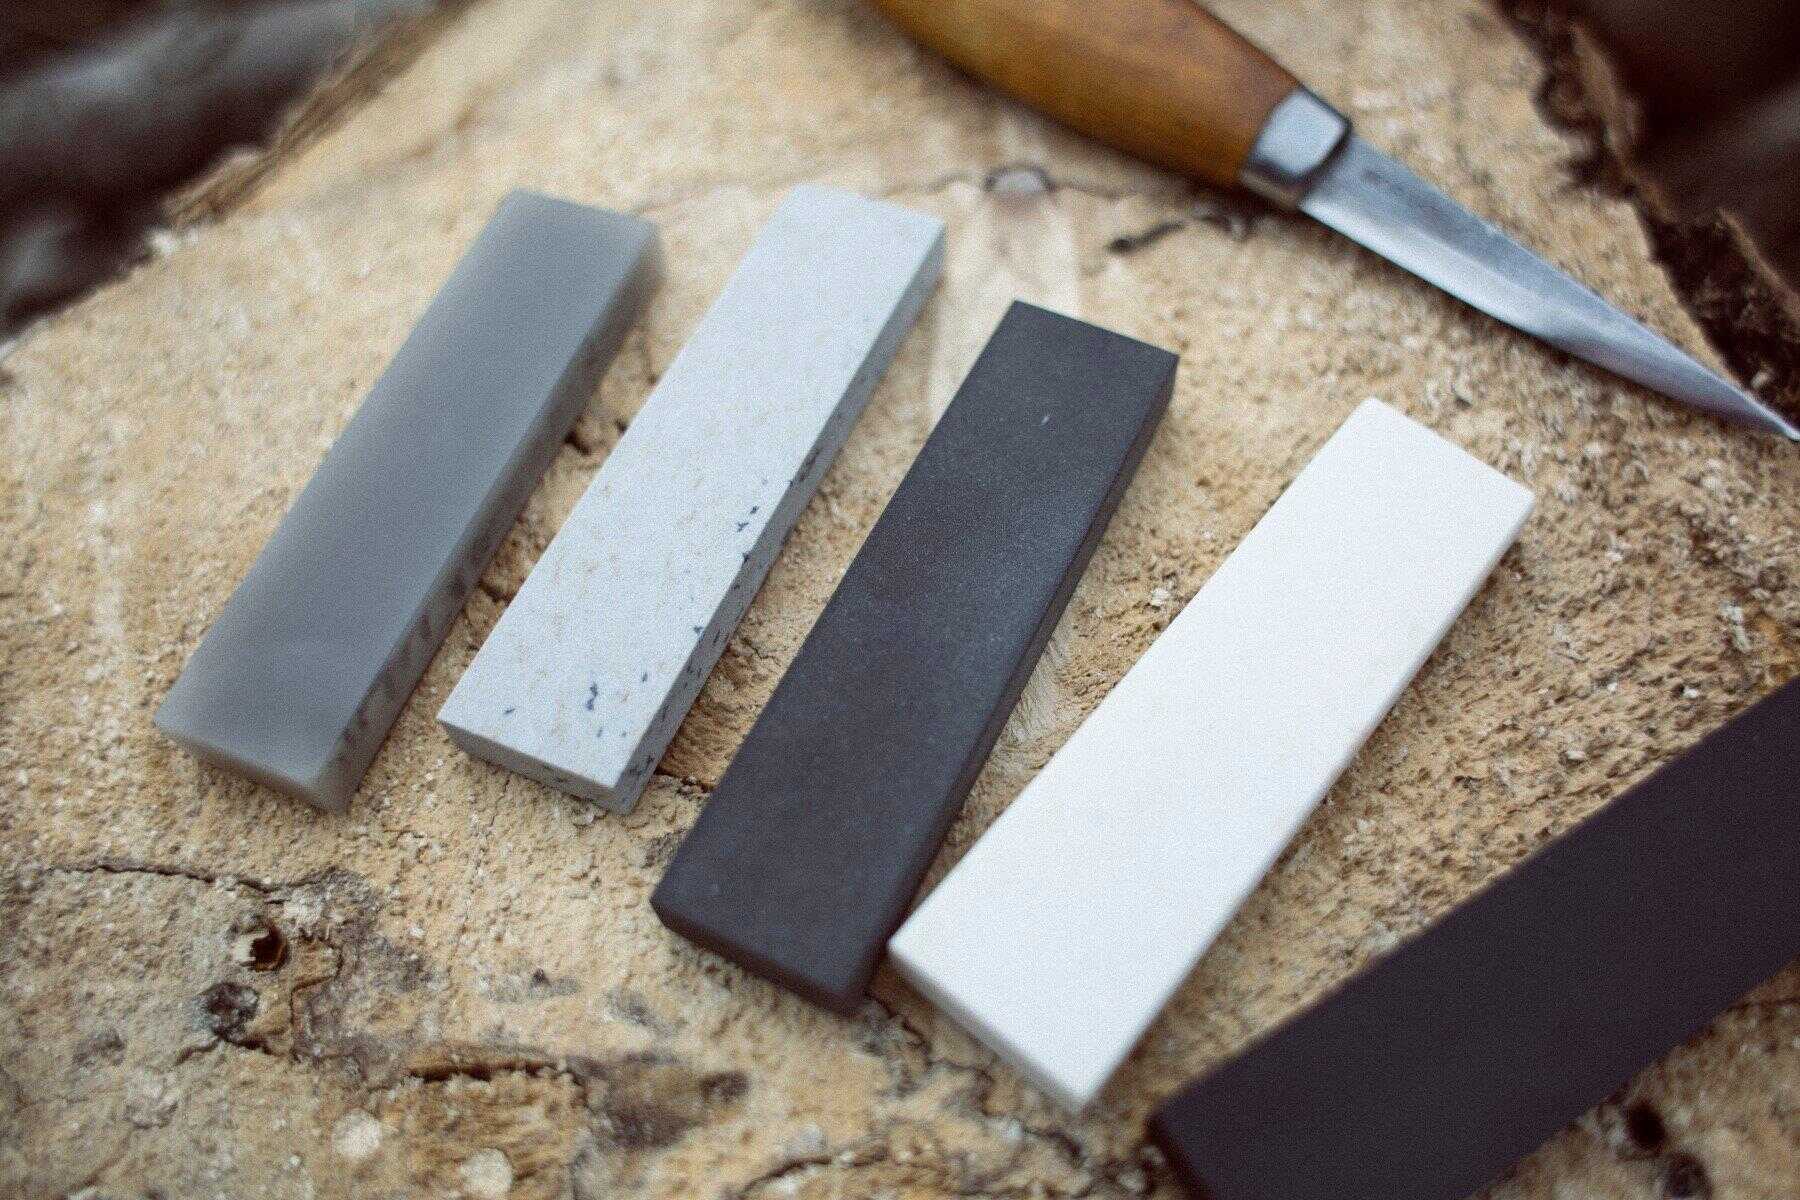 Sharpening Stone Review: Enhance Your Blades with Precision